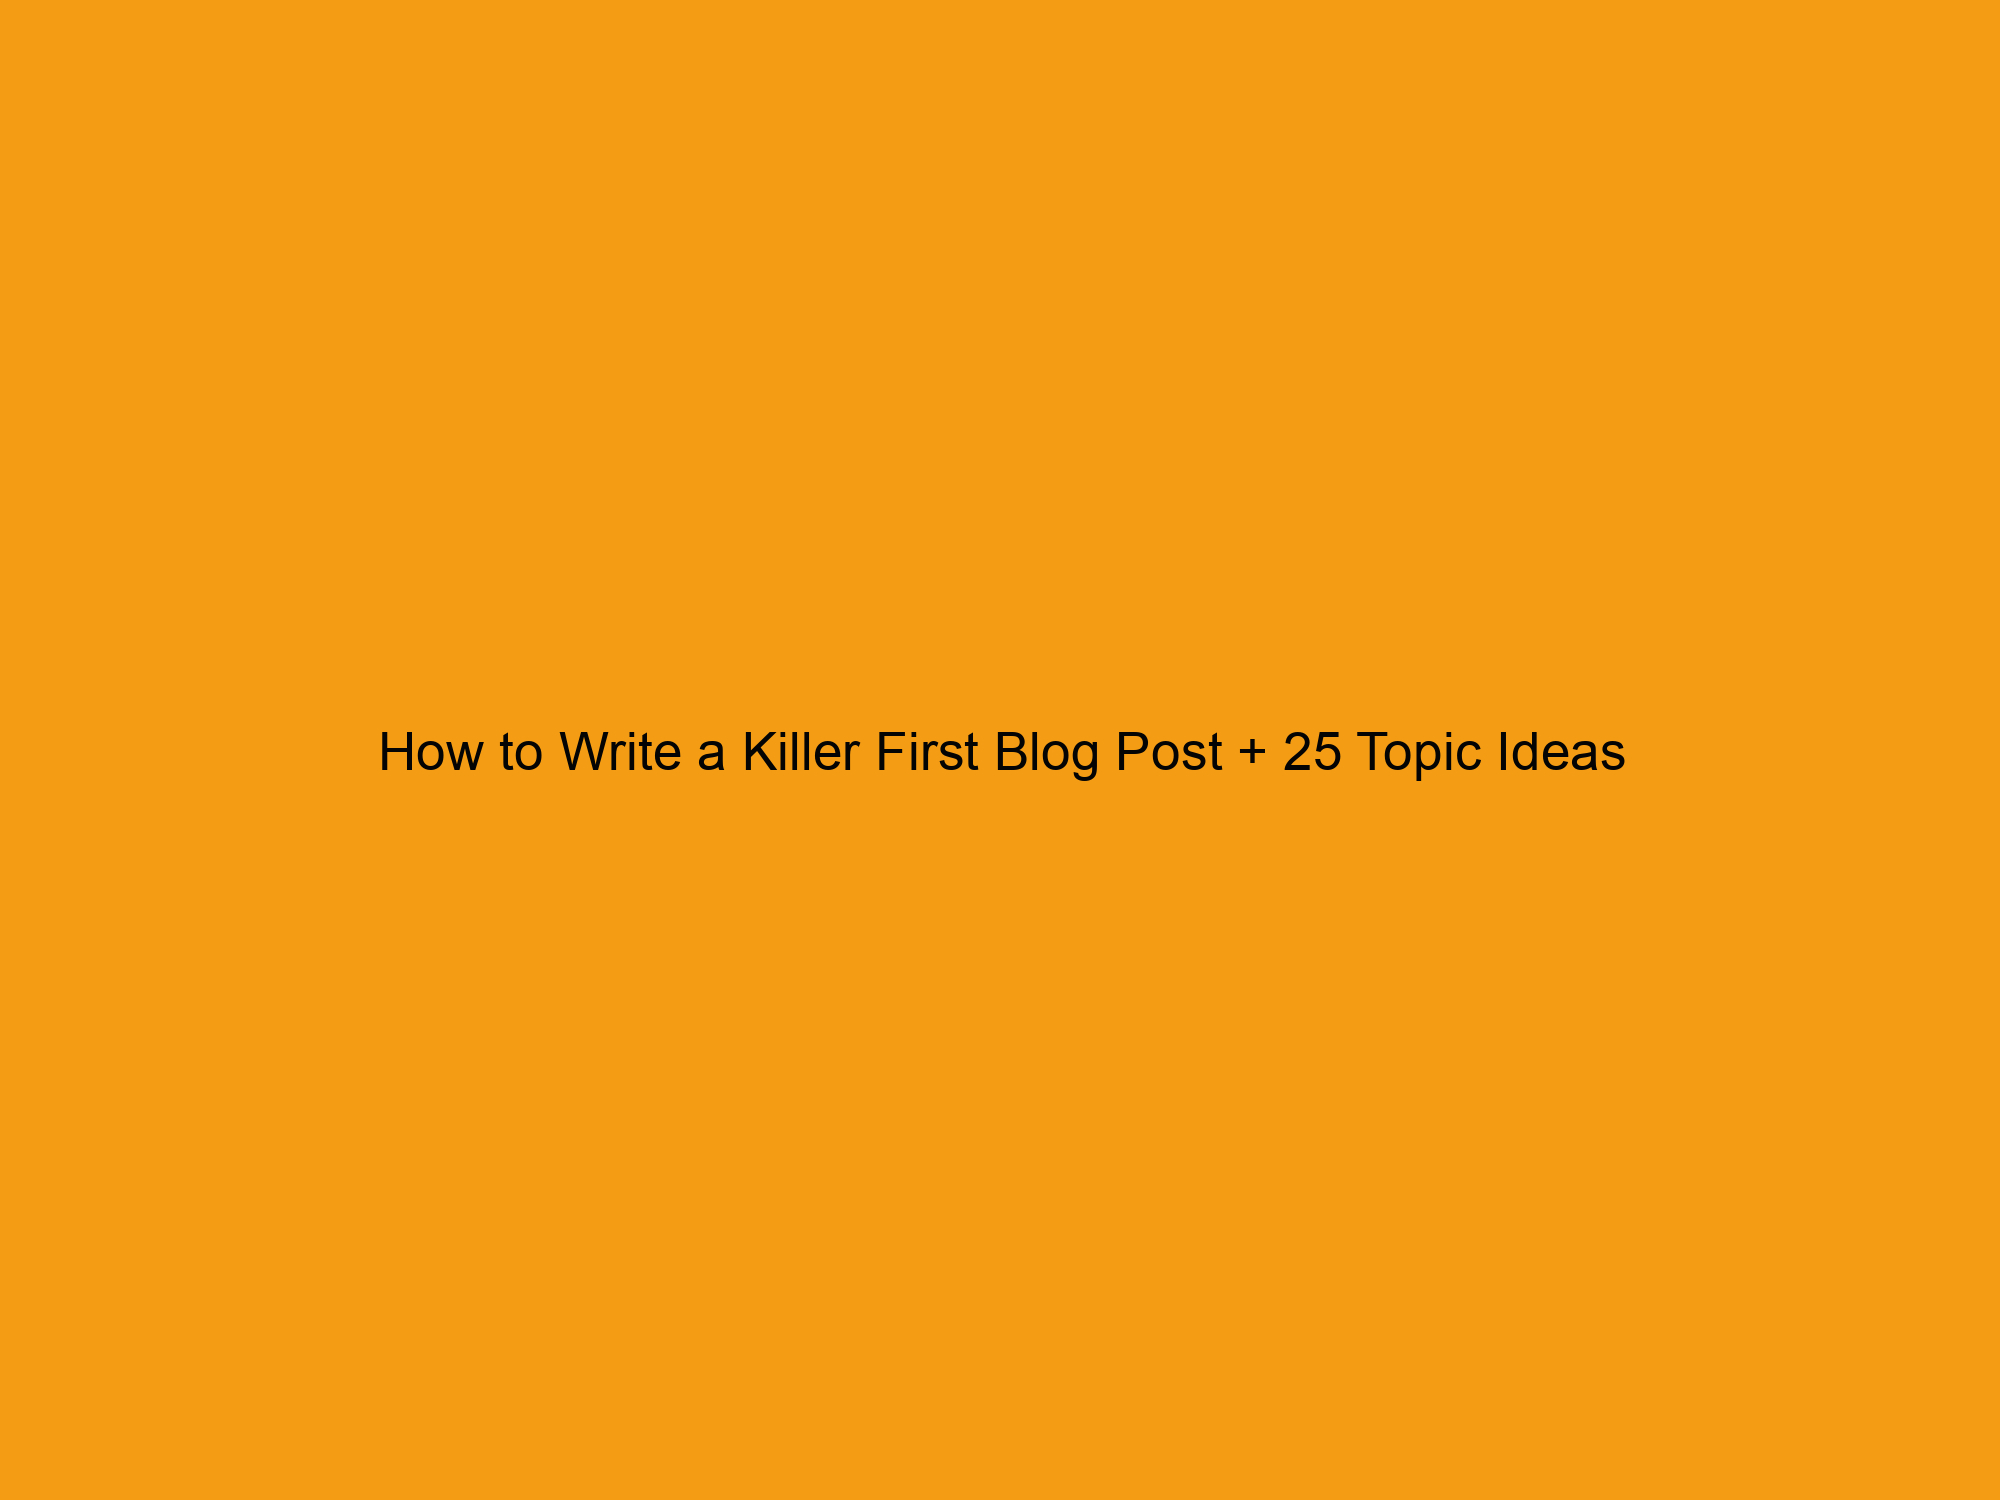 How to Write a Killer First Blog Post + 25 Topic Ideas